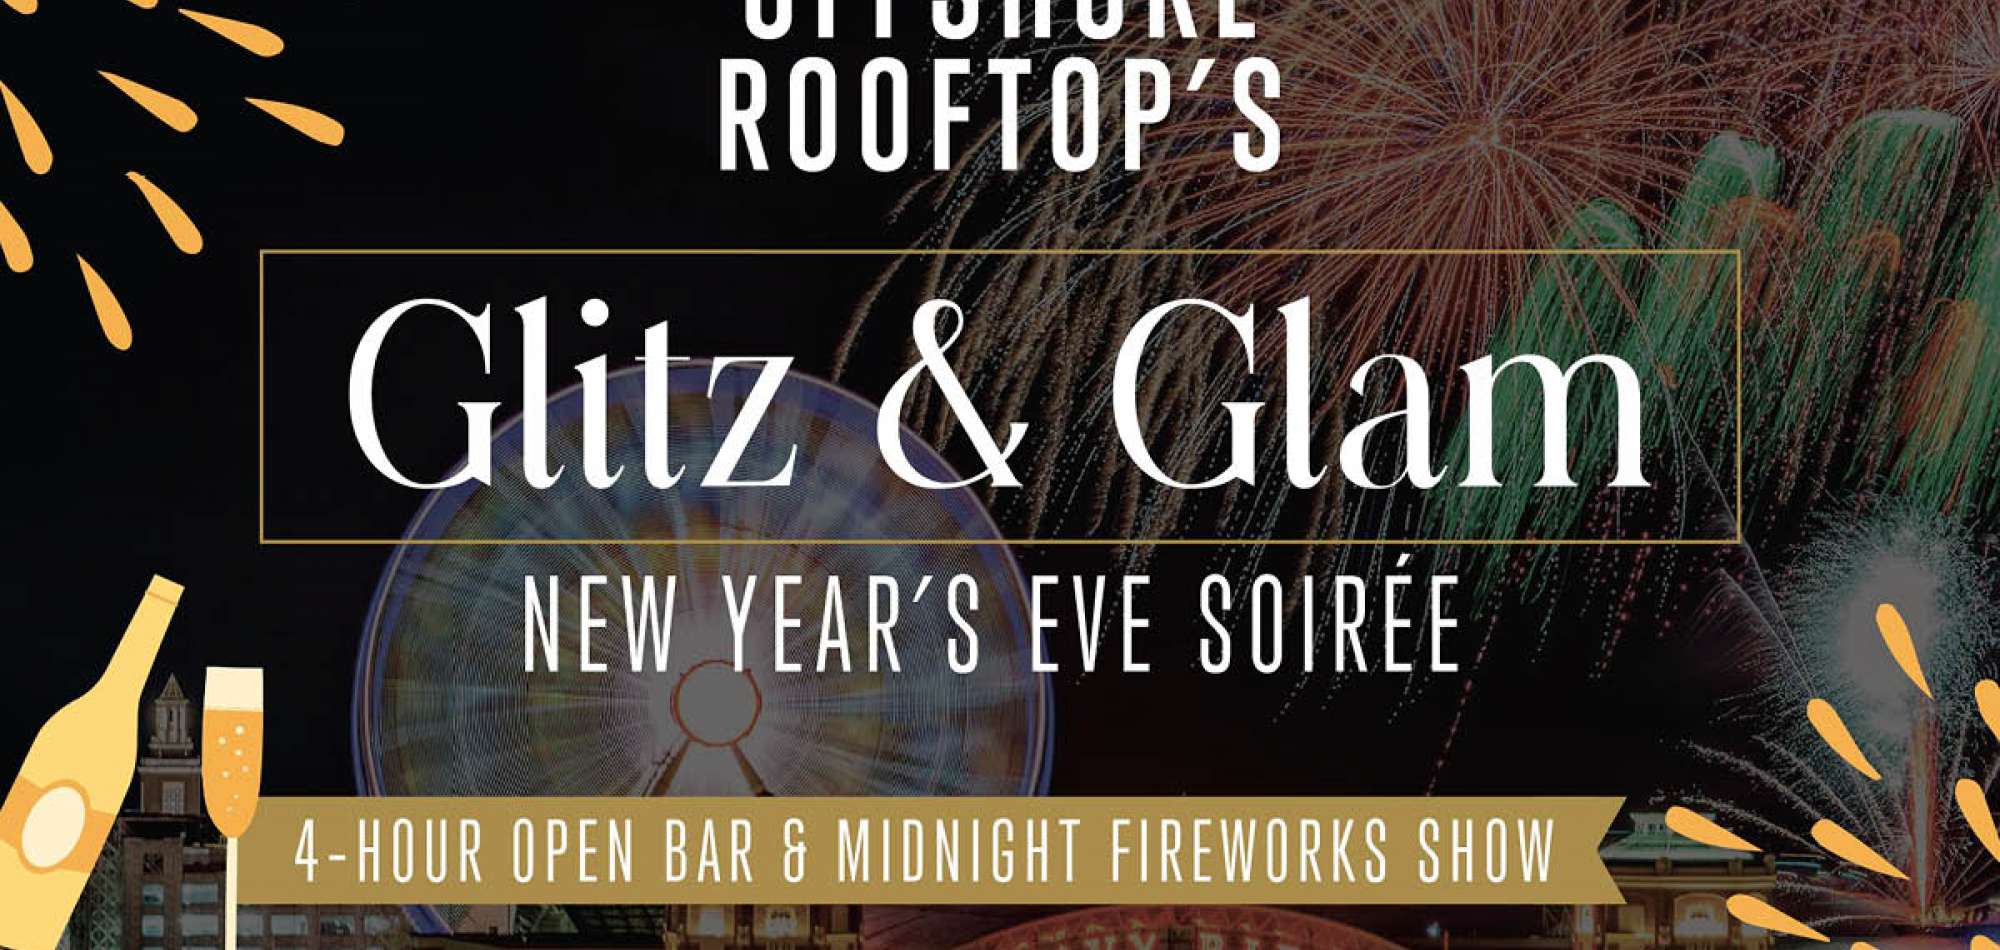 Offshore Rooftop’s Glitz & Glam New Year’s Eve Soiree